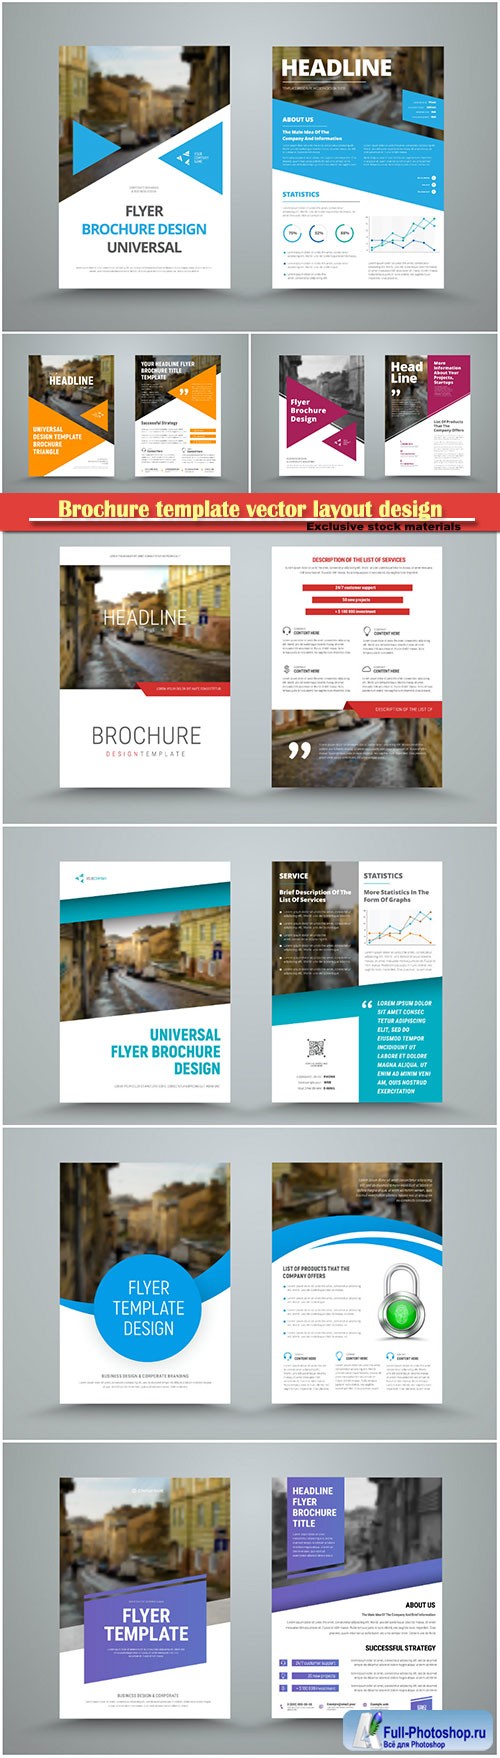 Brochure template vector layout design, corporate business annual report, magazine, flyer mockup # 171